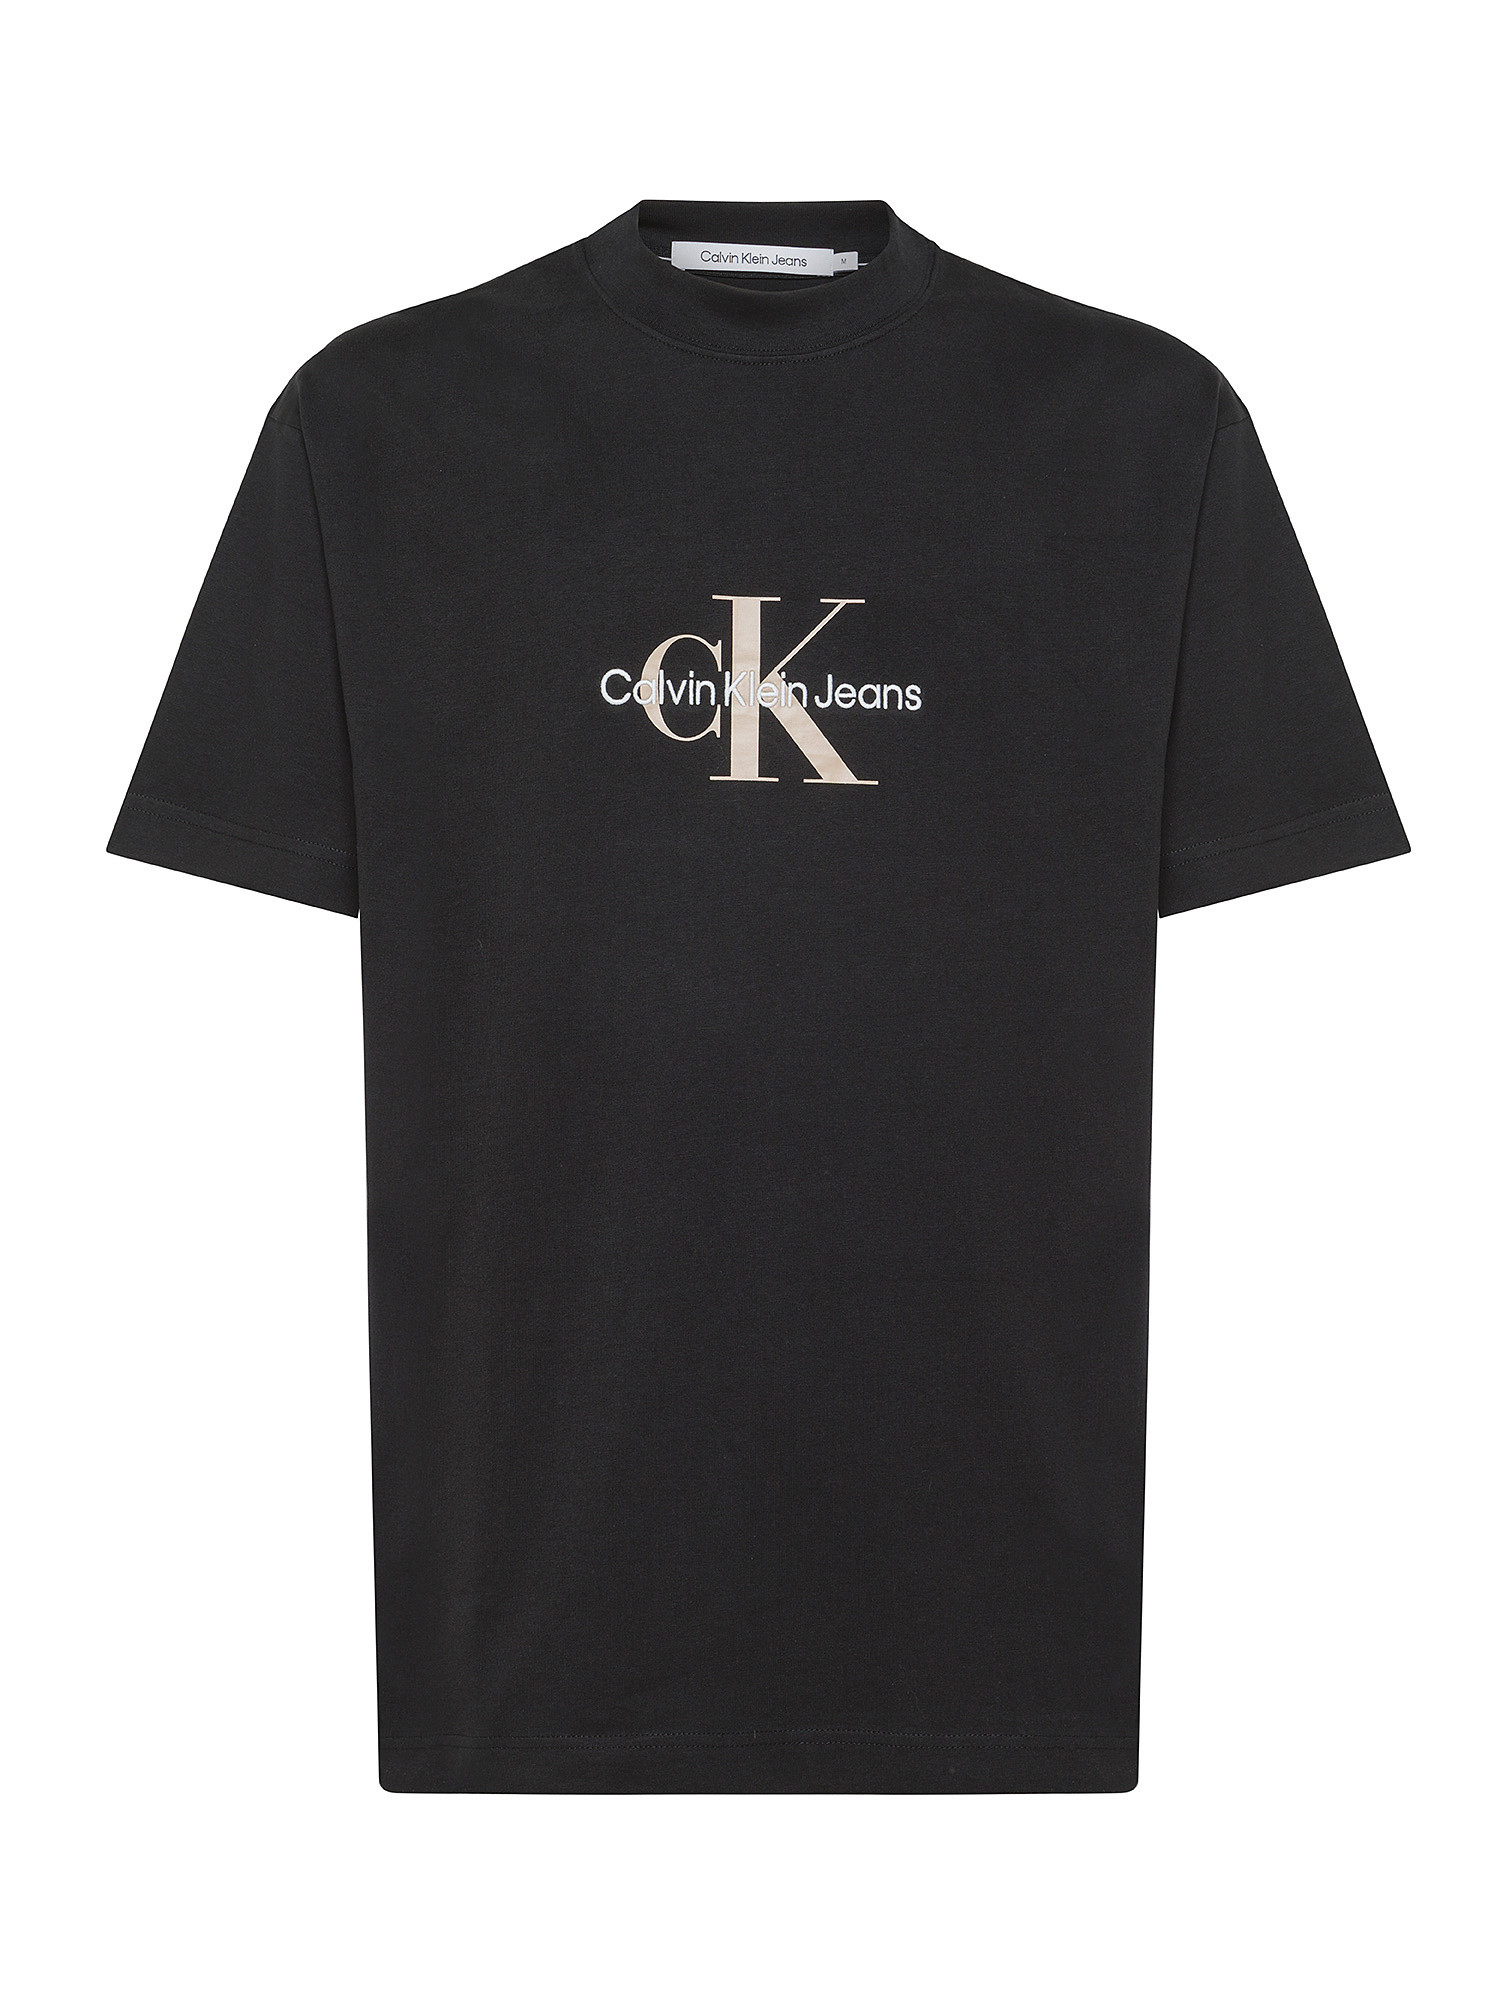 Calvin Klein Jeans - Oversized cotton T-shirt with logo, Black, large image number 0